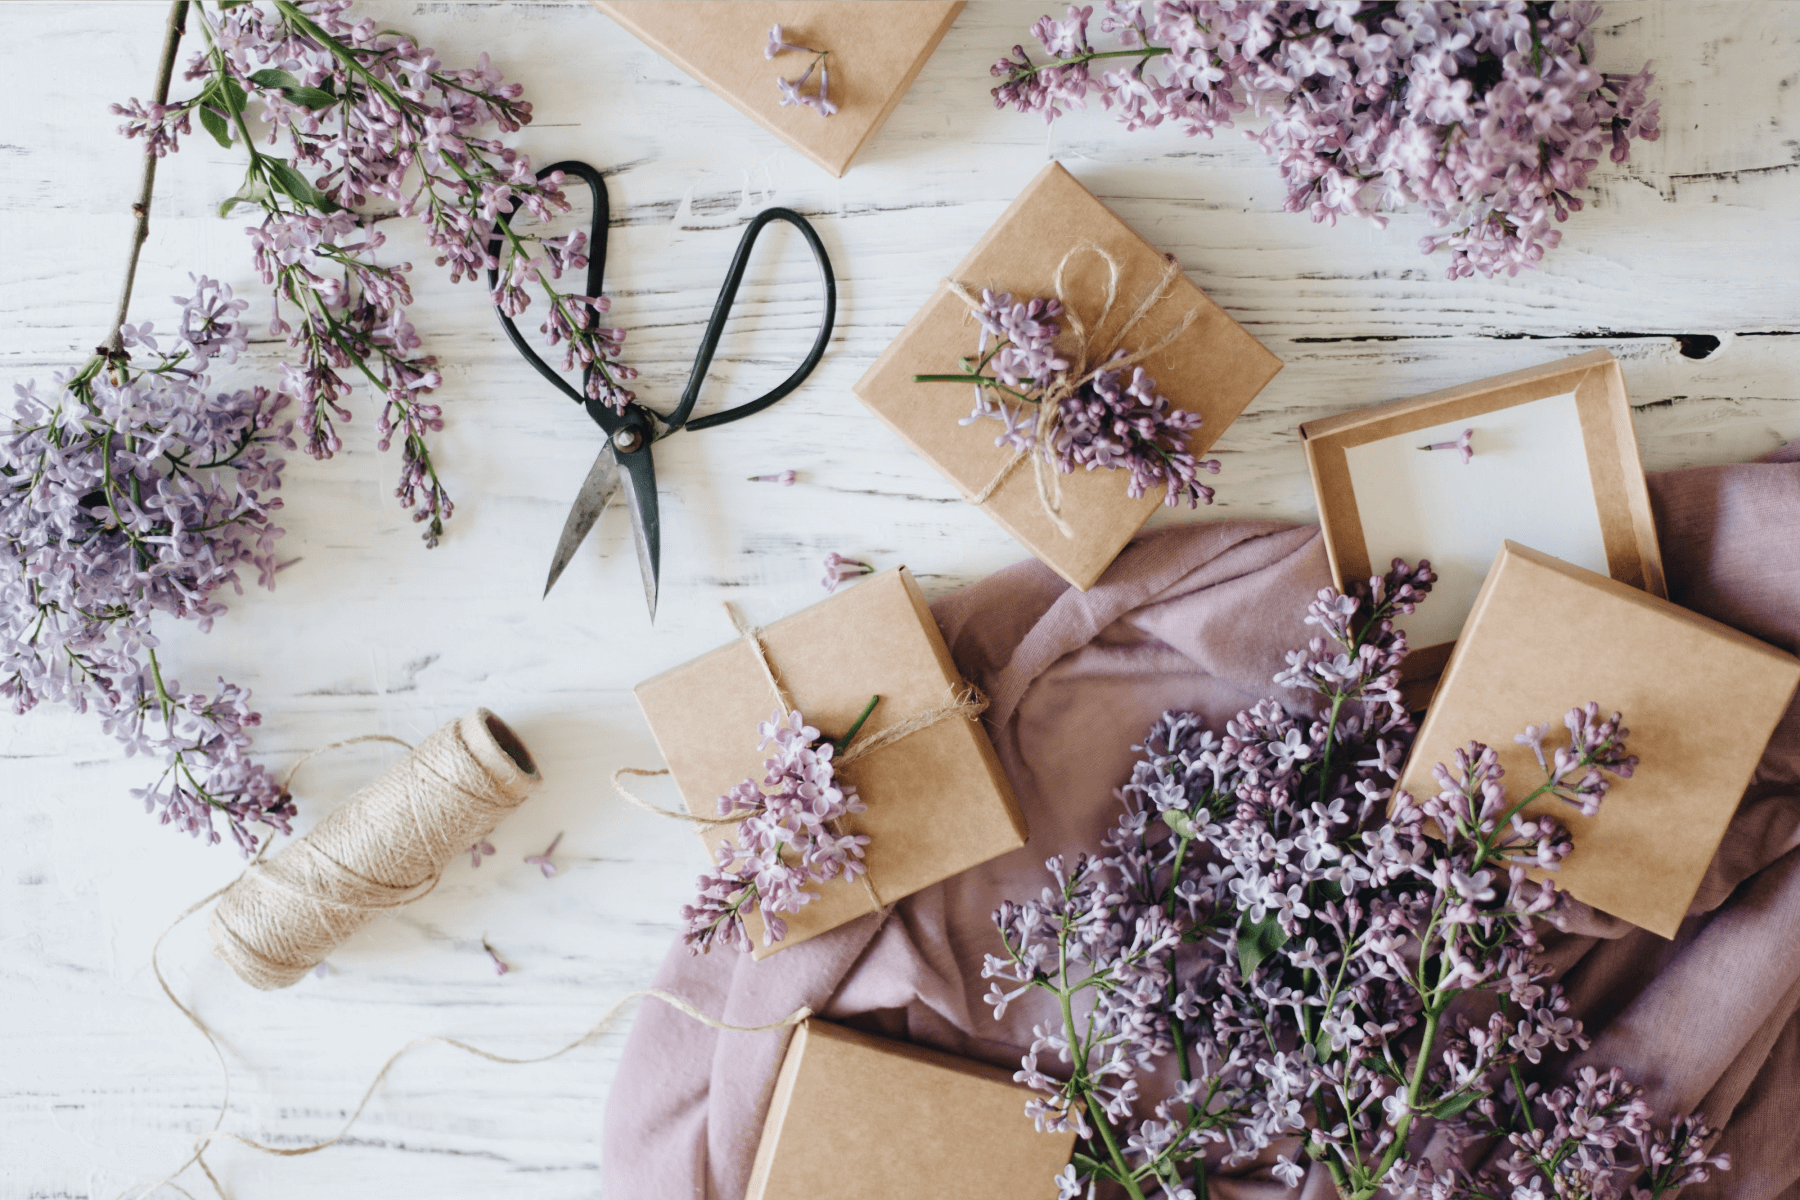 Lilac clippings on a table, some tied onto small brown gift boxes.